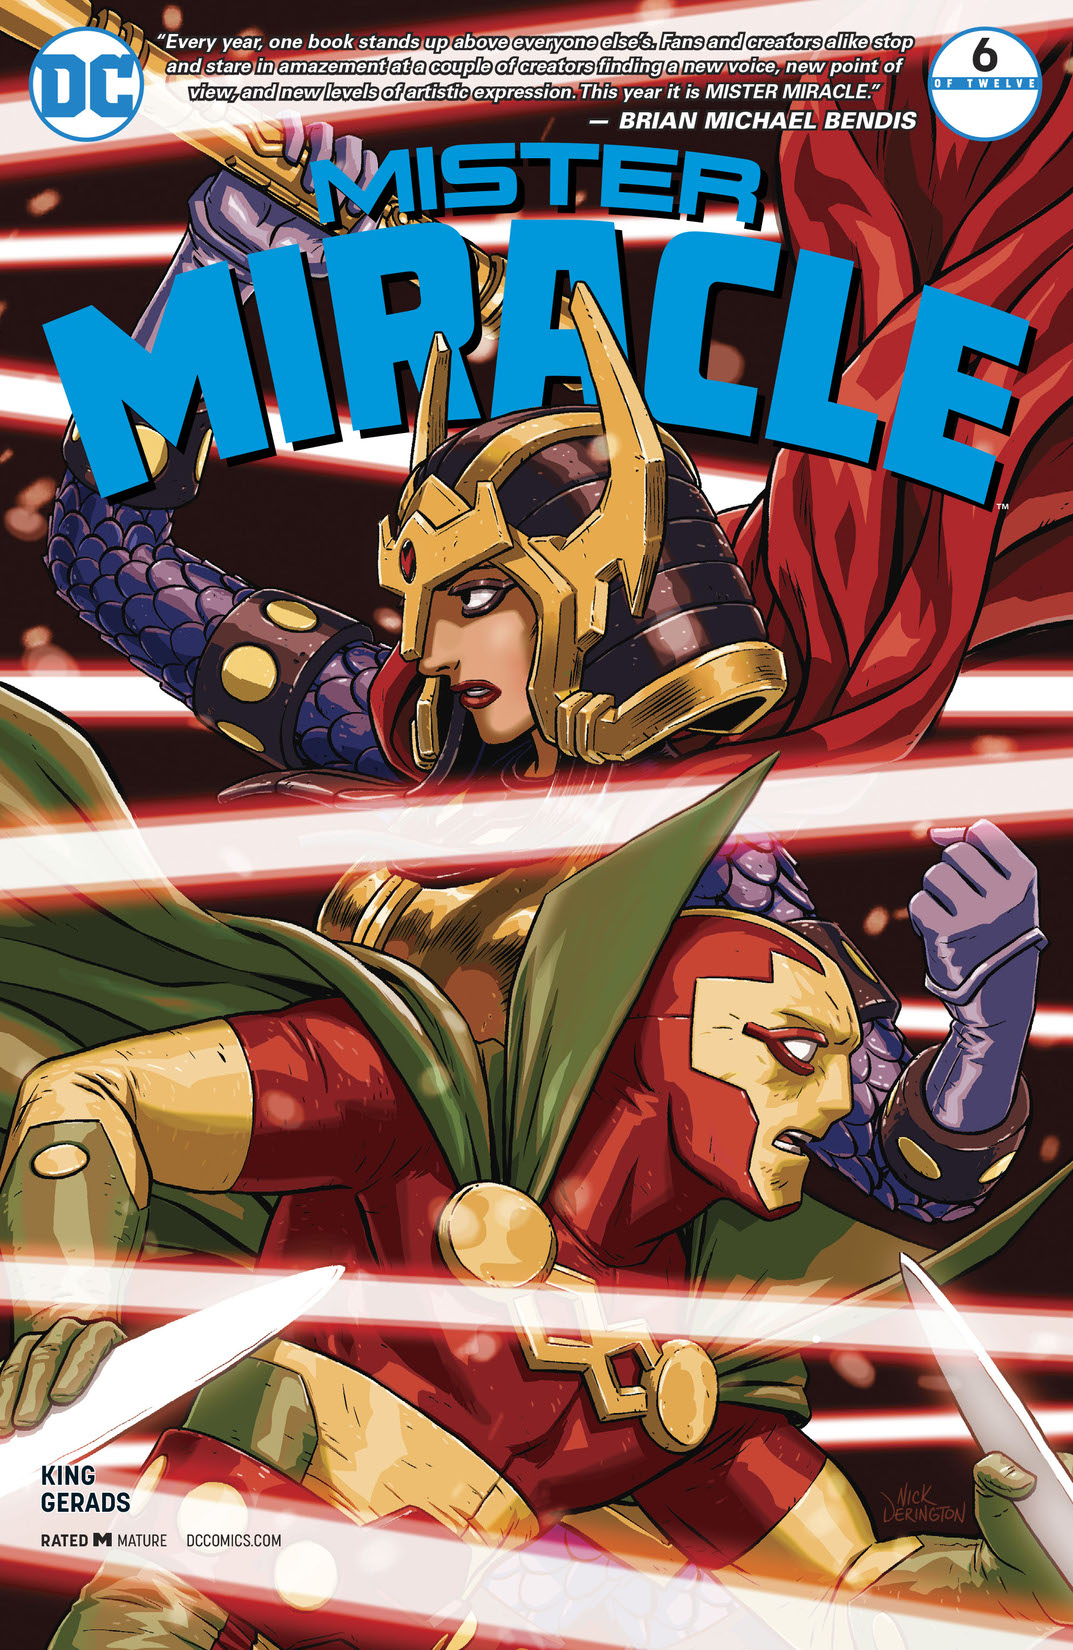 Mister Miracle (2017-) #6 preview images